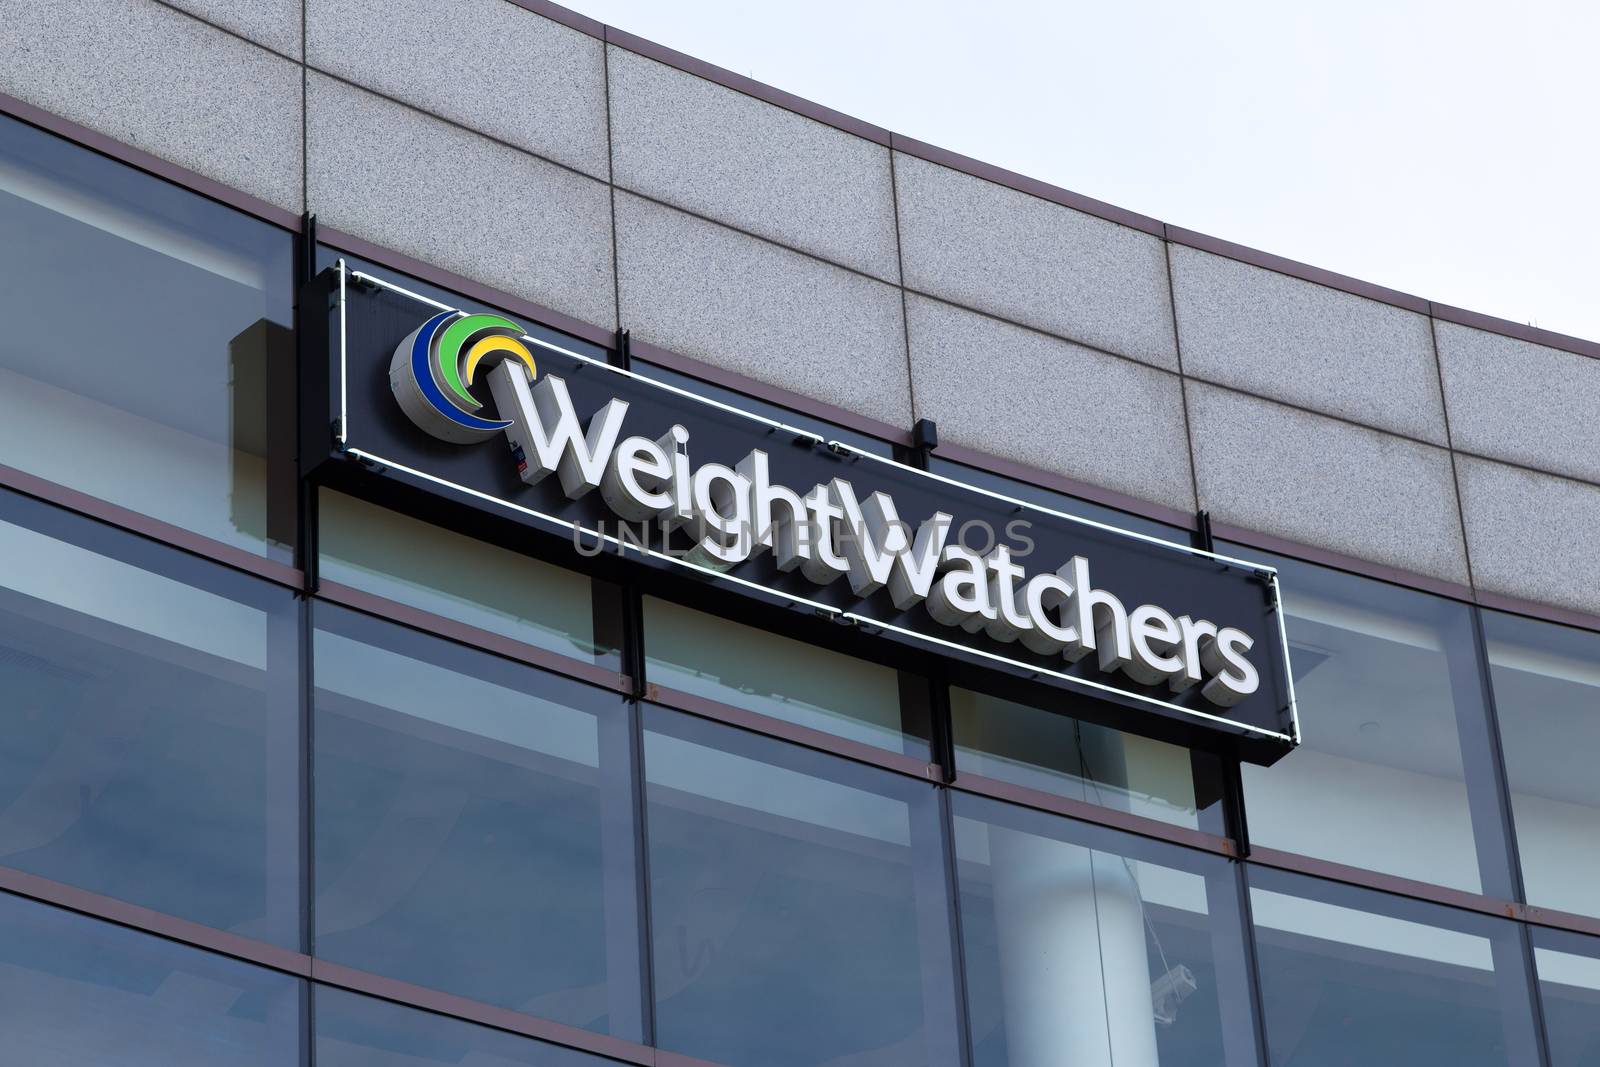 Weight Watchers Corporate Office Building by wolterk